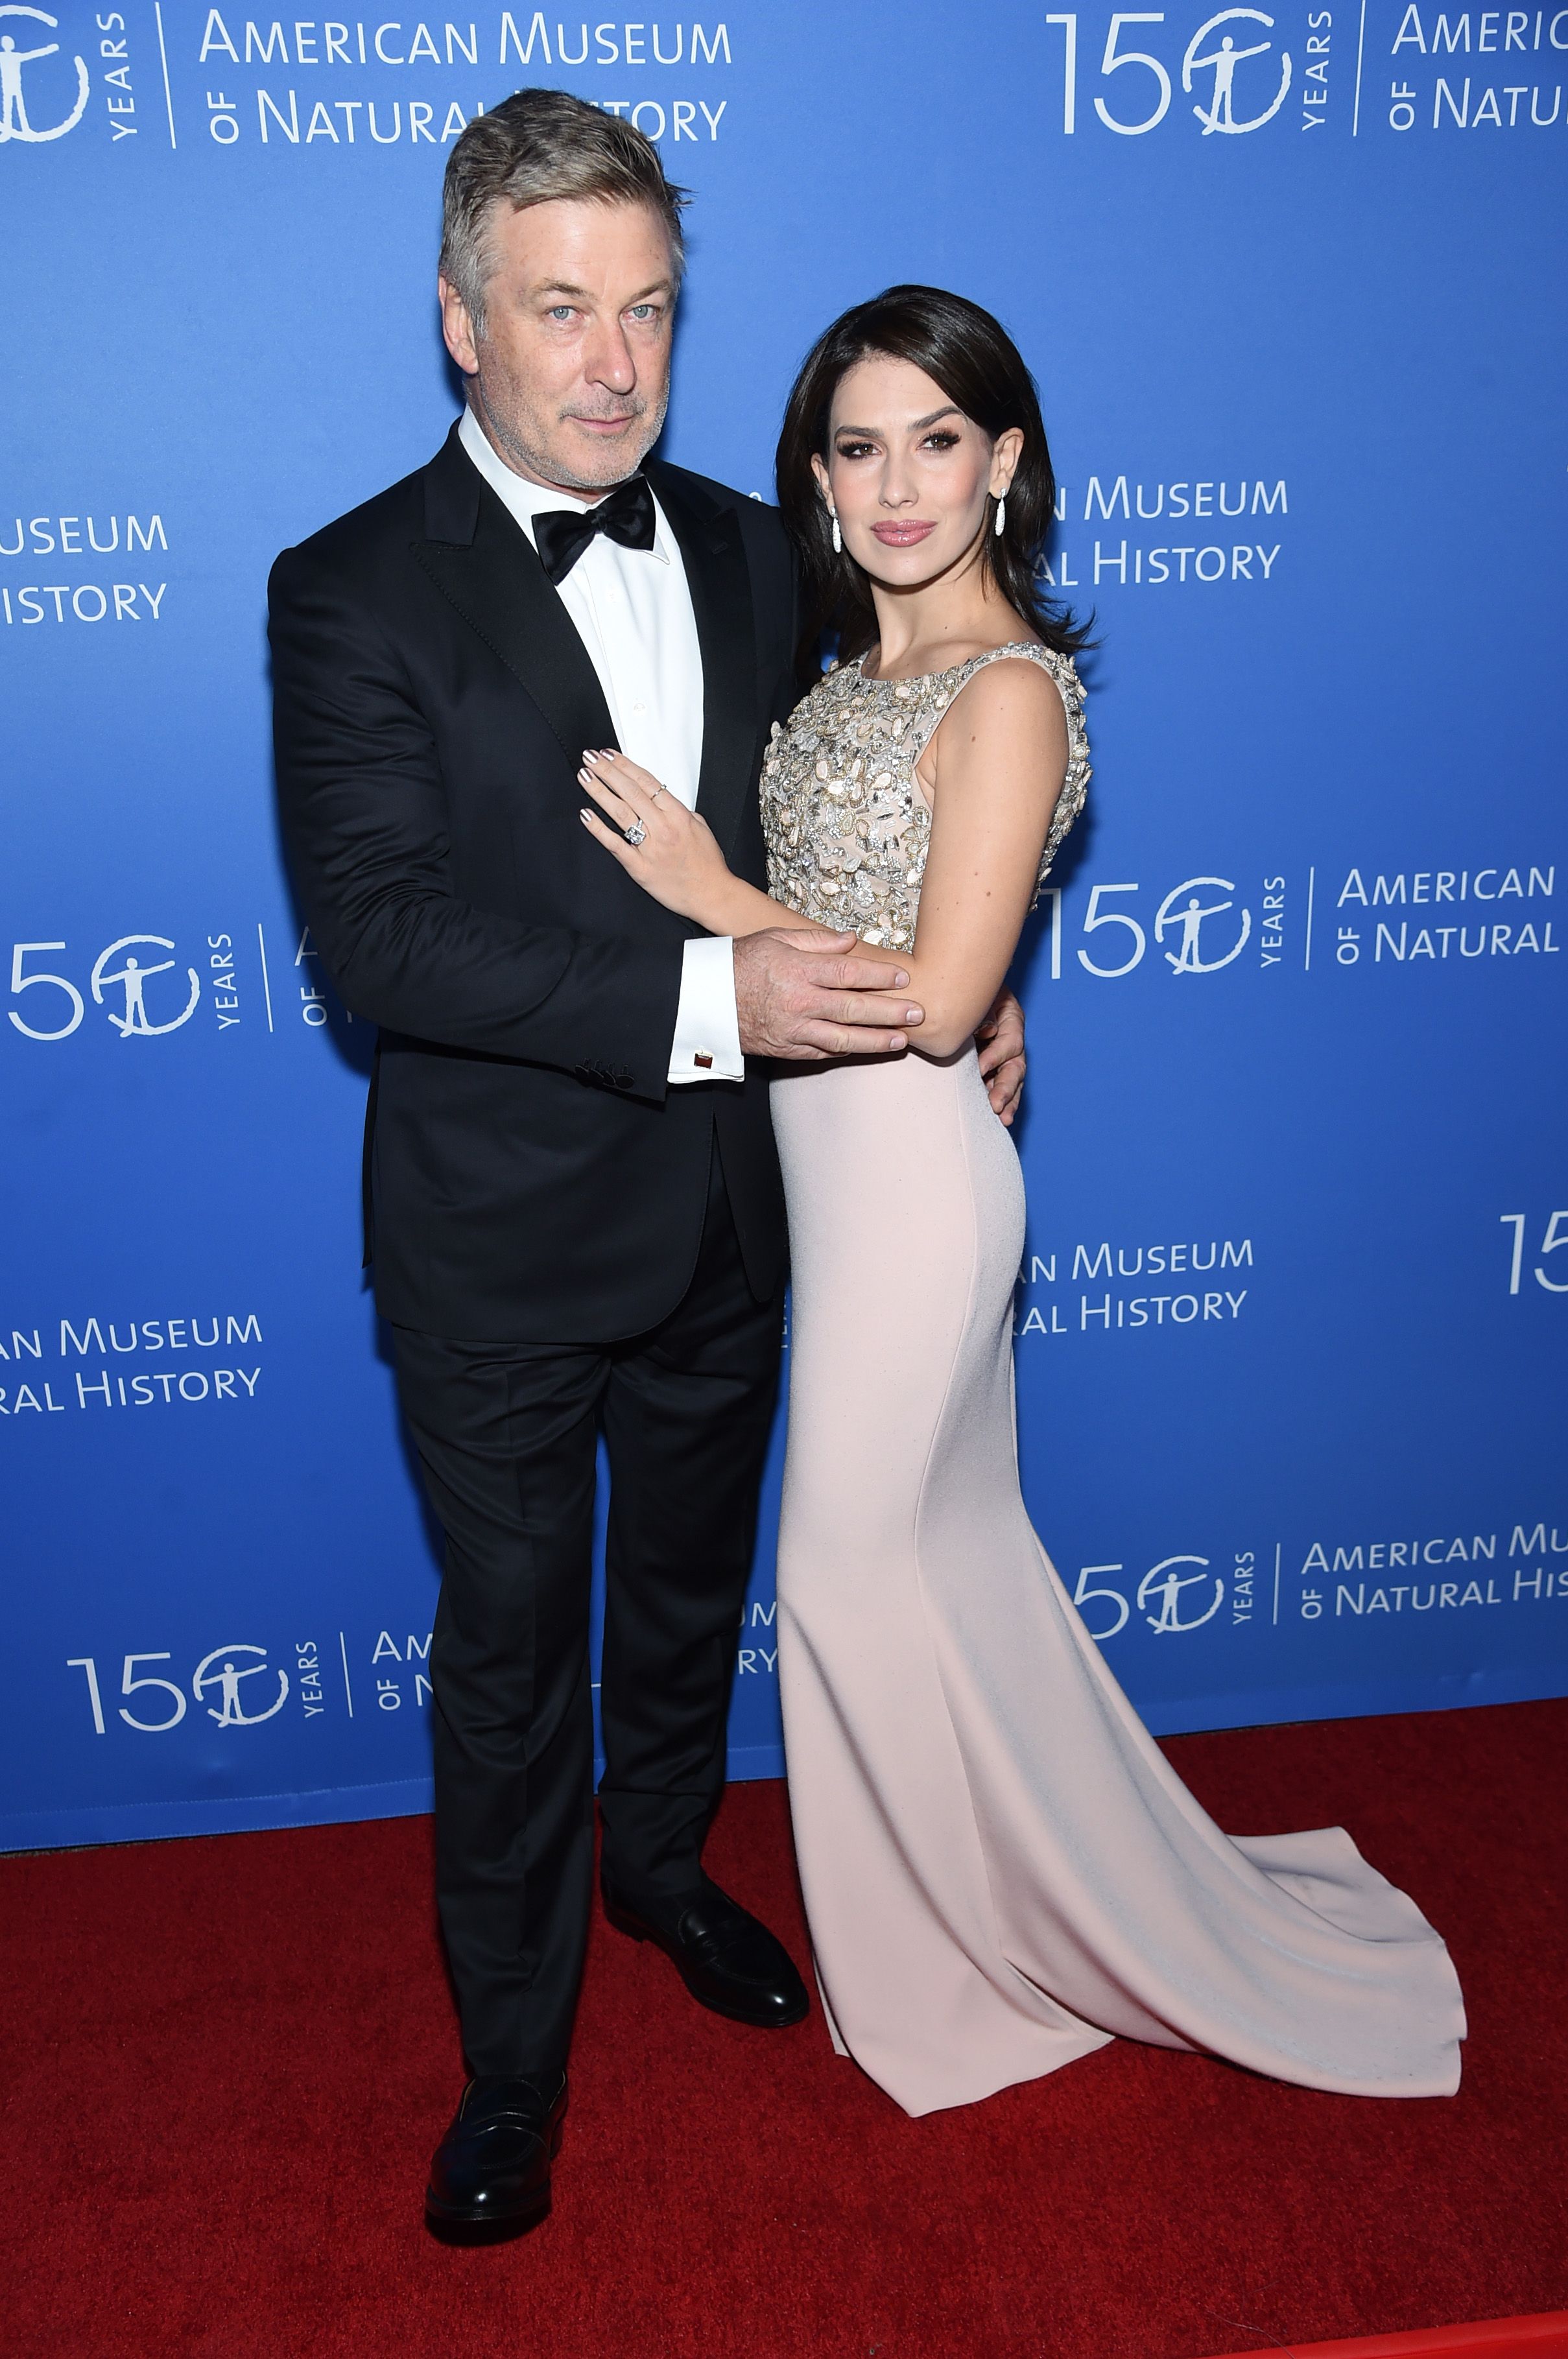 Alec and Hilaria Baldwin during the American Museum Of Natural History Gala on November 21, 2019, in New York City. | Source: Getty Images